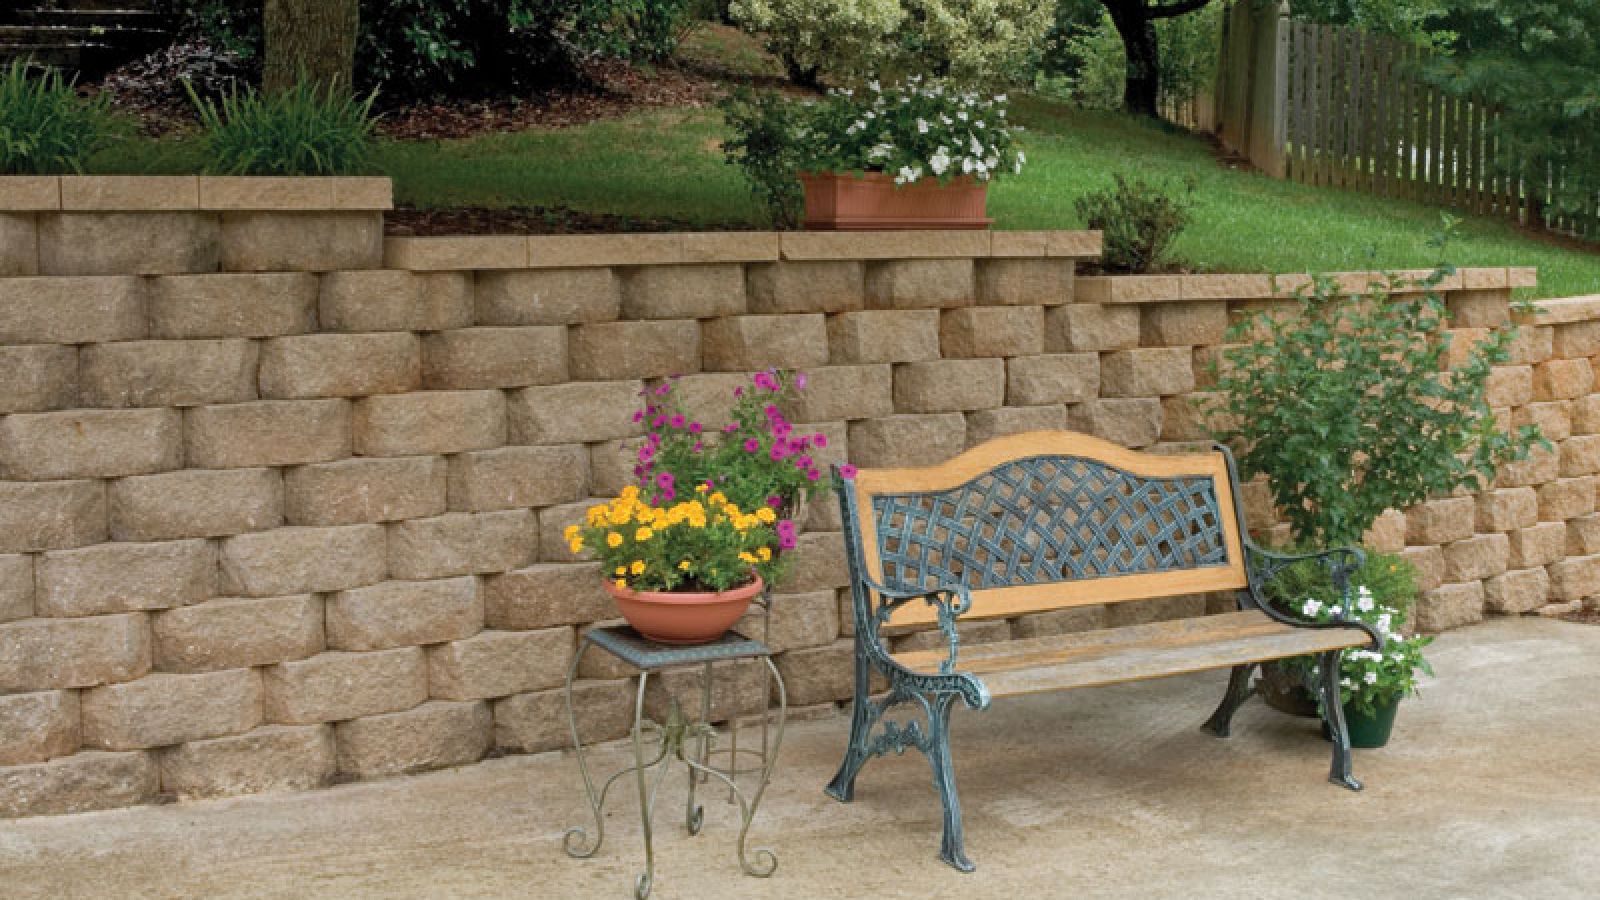 Legacy Stone® Retaining Wall blocks by Keystone Hardscapes, a masterpiece at AR Stoneworks & Outdoor Living, emphasizing its striated Deco split design.